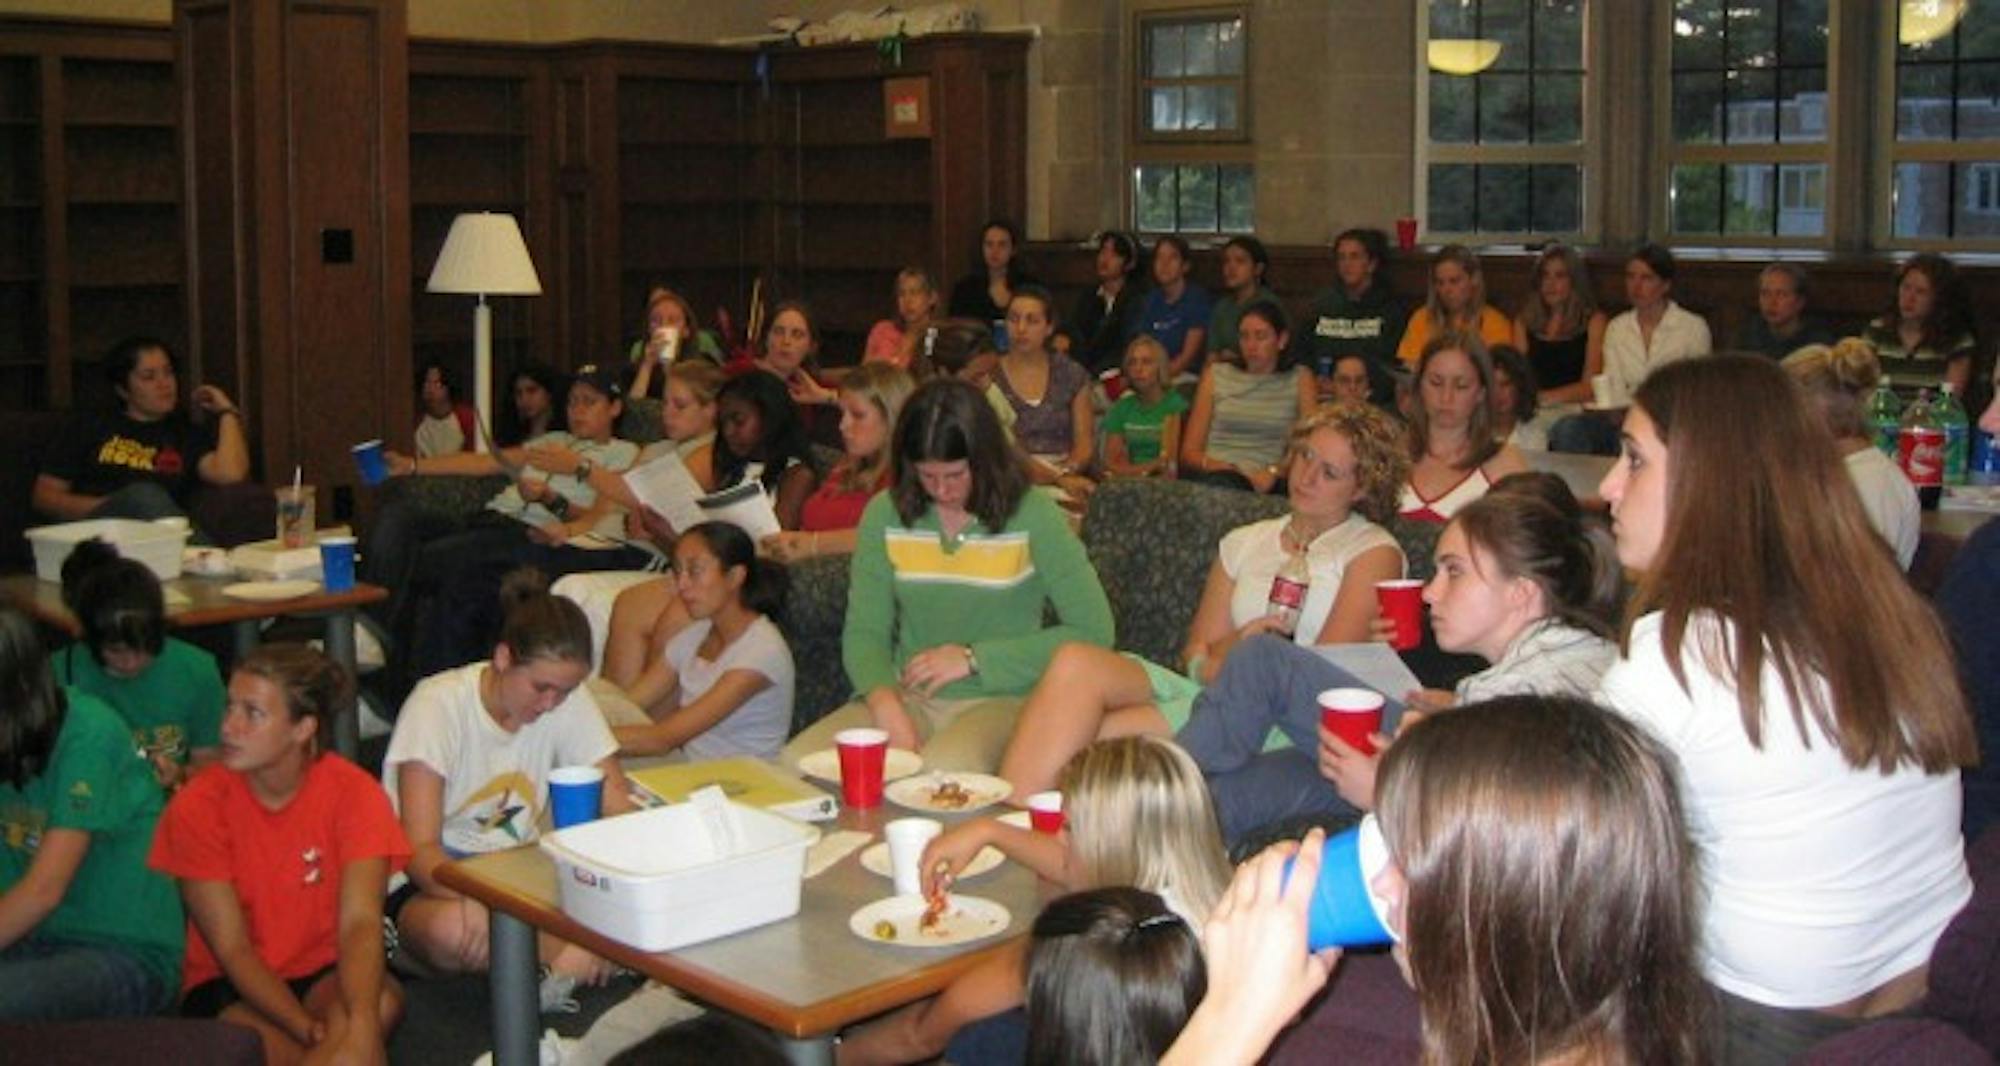 Members of the Society of Women Engineers attend the monthly meetings and discuss the club's future plans and events.